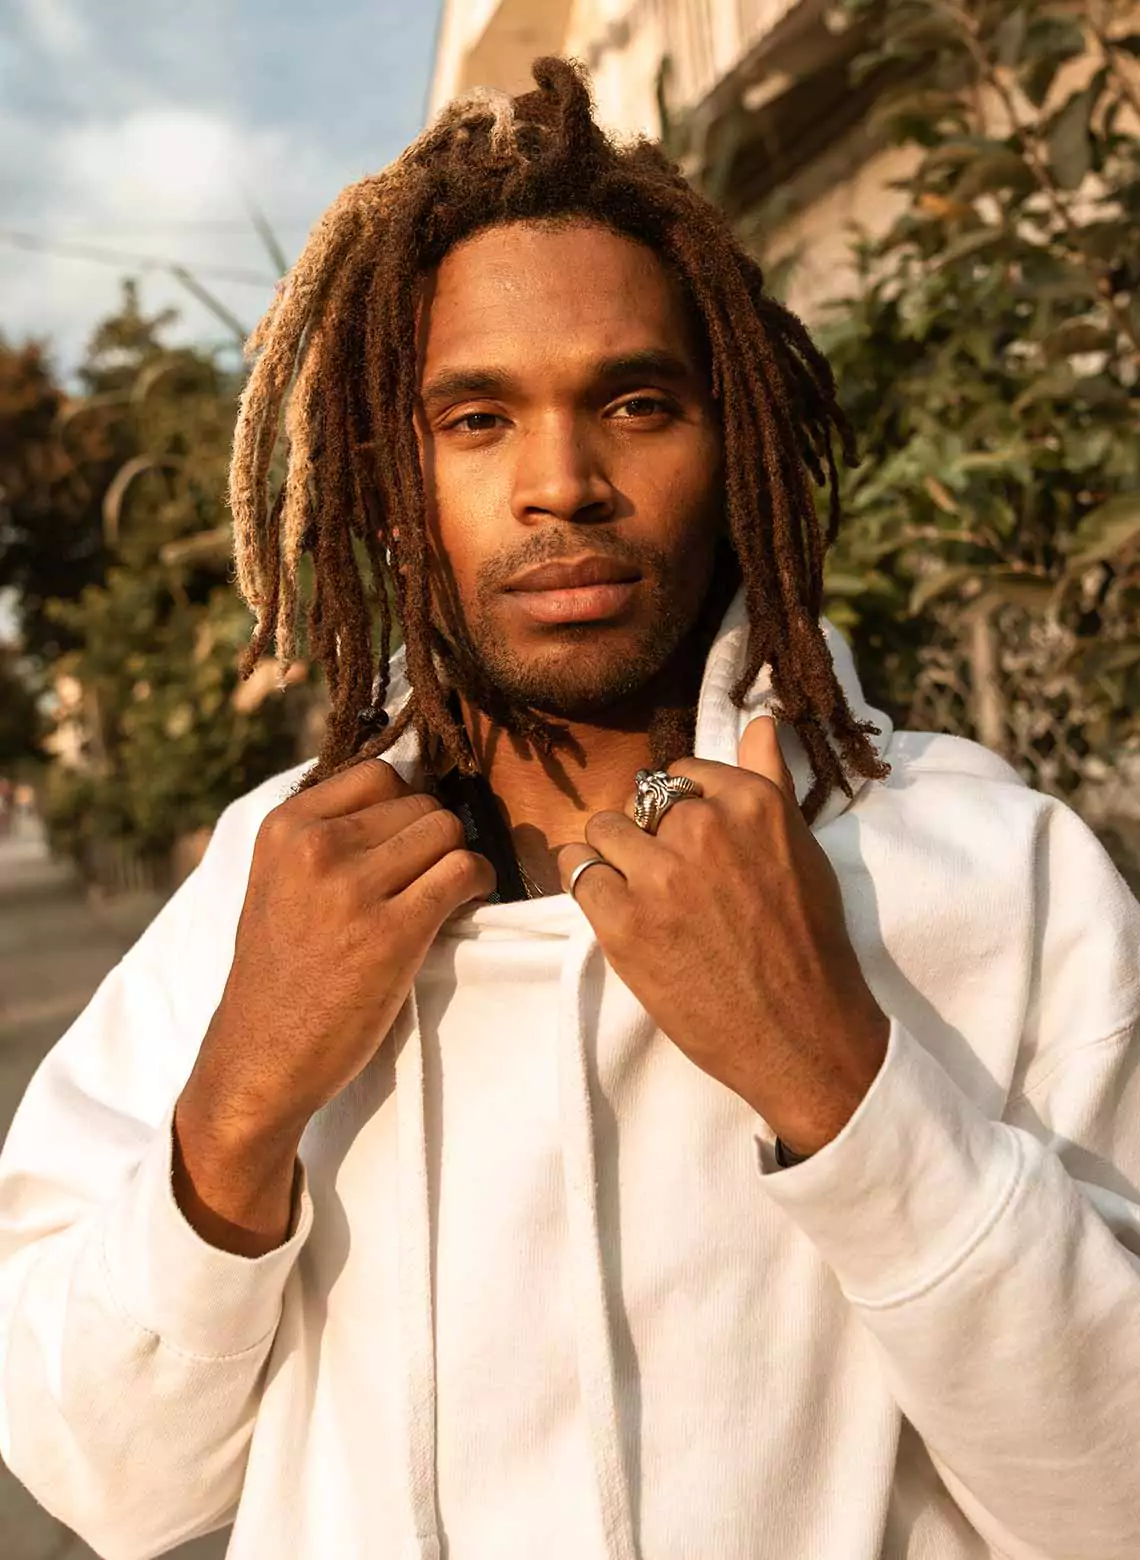 Image of man with layered locs